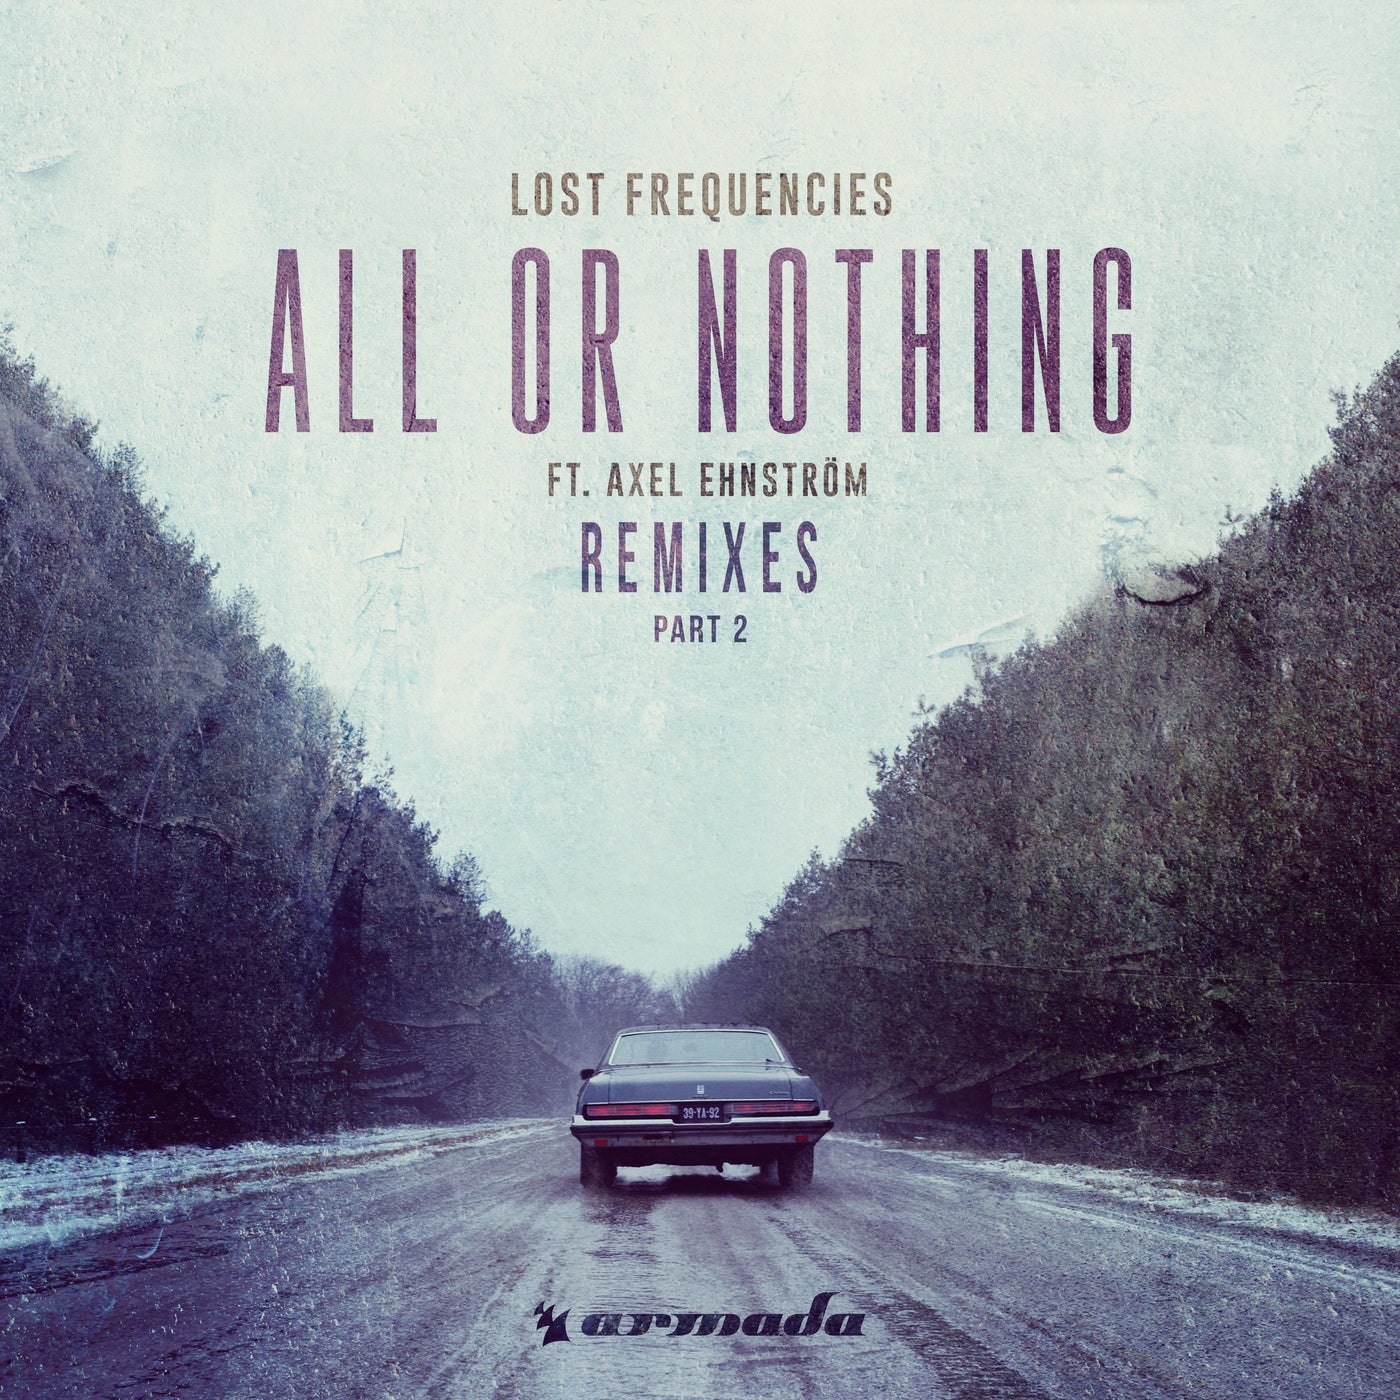 All Or Nothing - Remixes Part 2